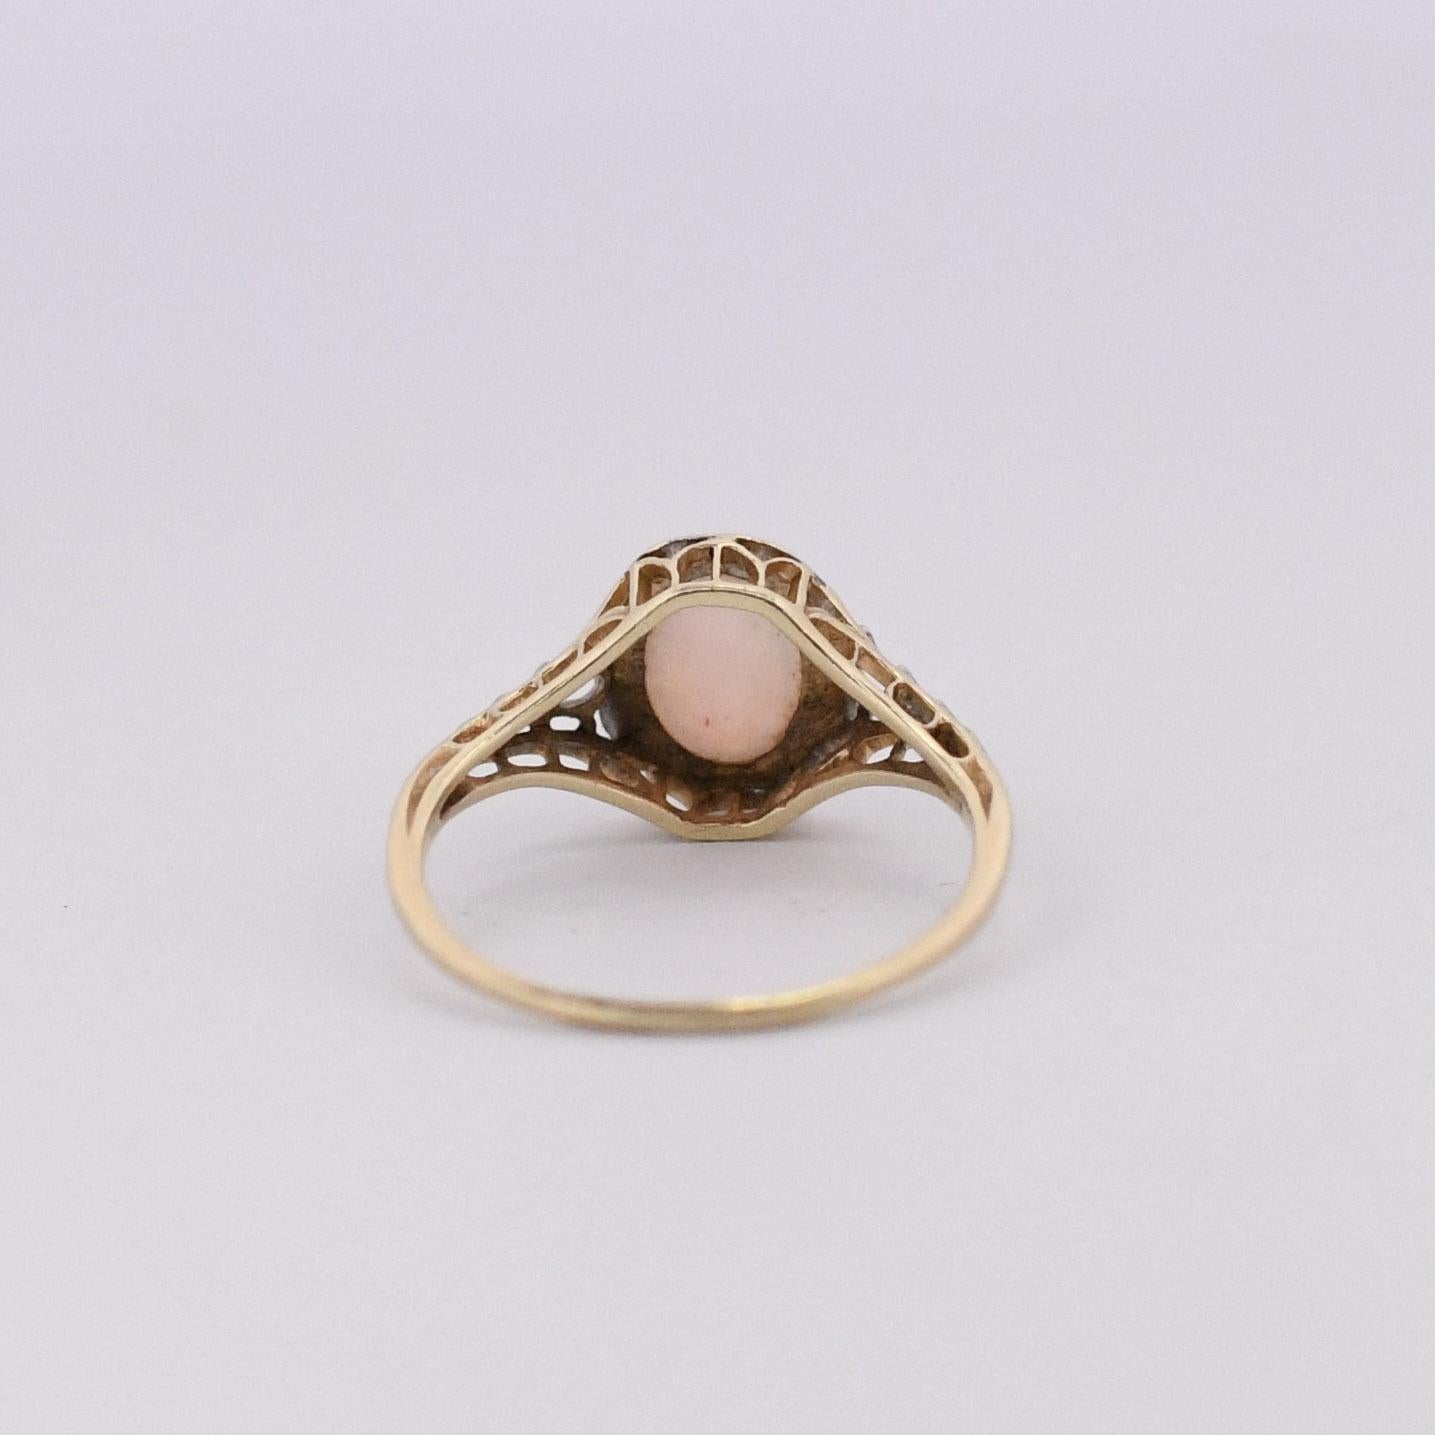 Opal Filigree Ring 14K Yellow Gold With Platinum Top In Good Condition For Sale In Addison, TX